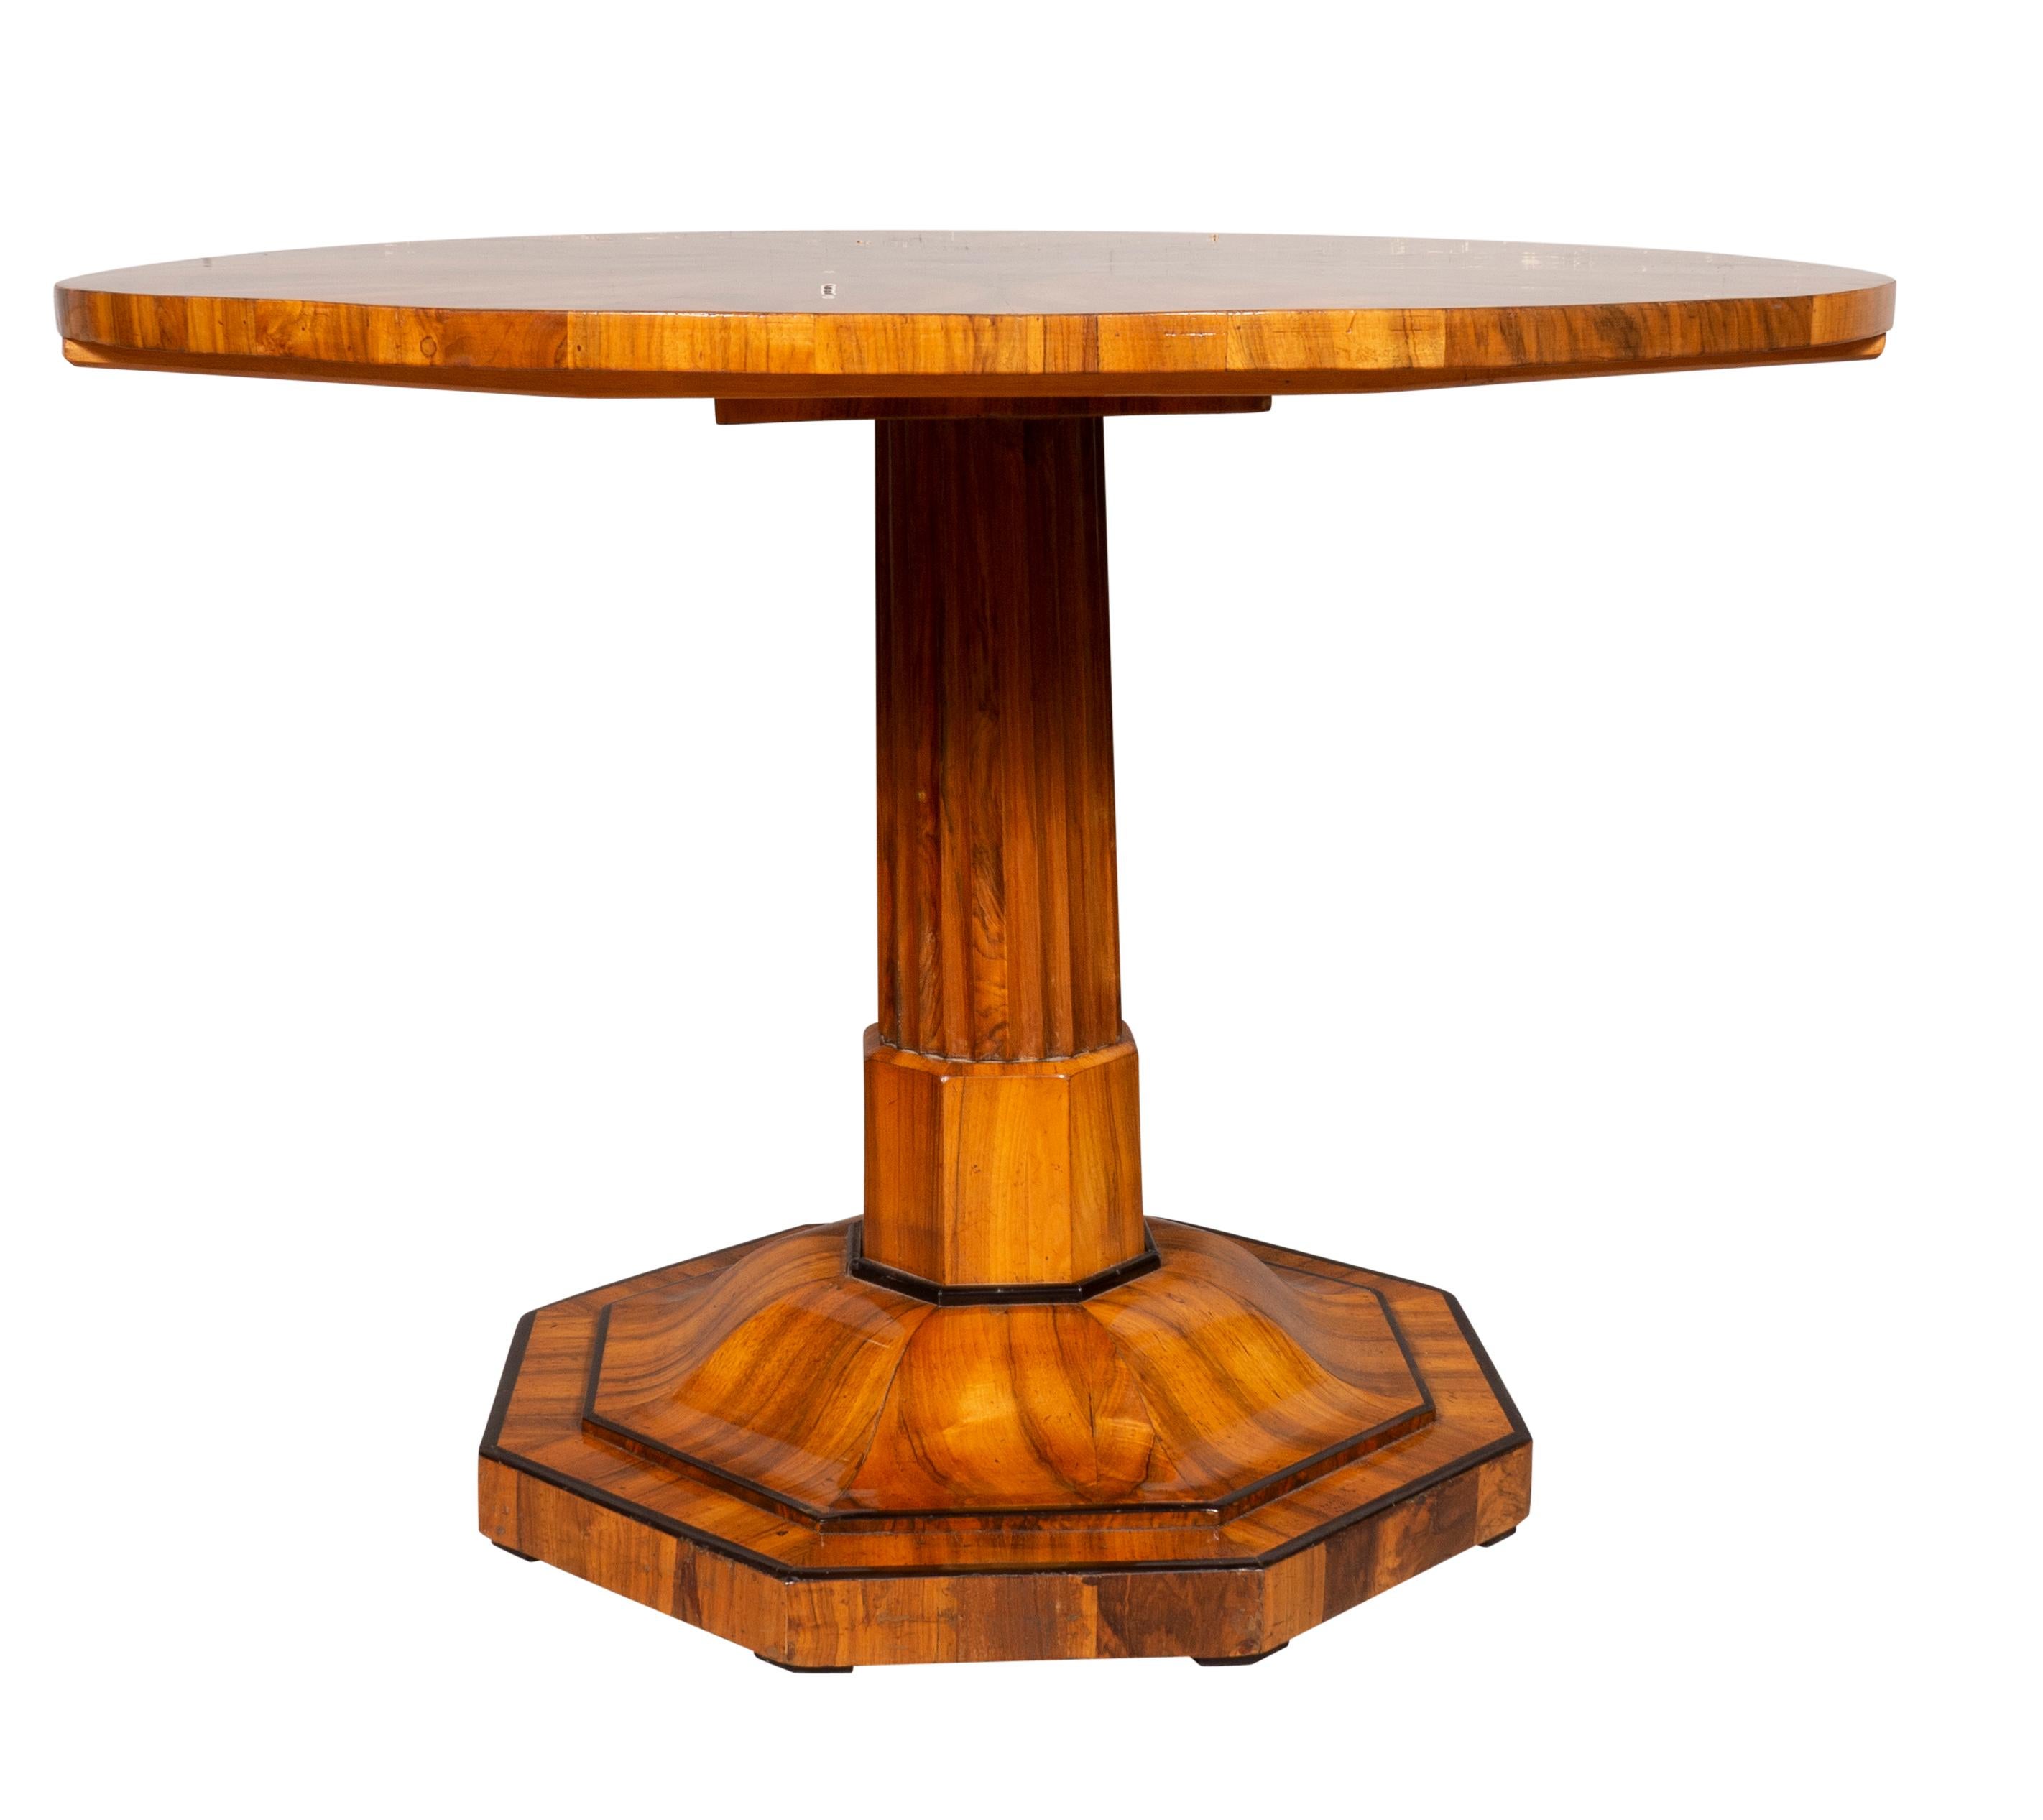 Circular hinged top with sunburst inlay creating a star. Fluted columnar support joining an octagonal plinth base.